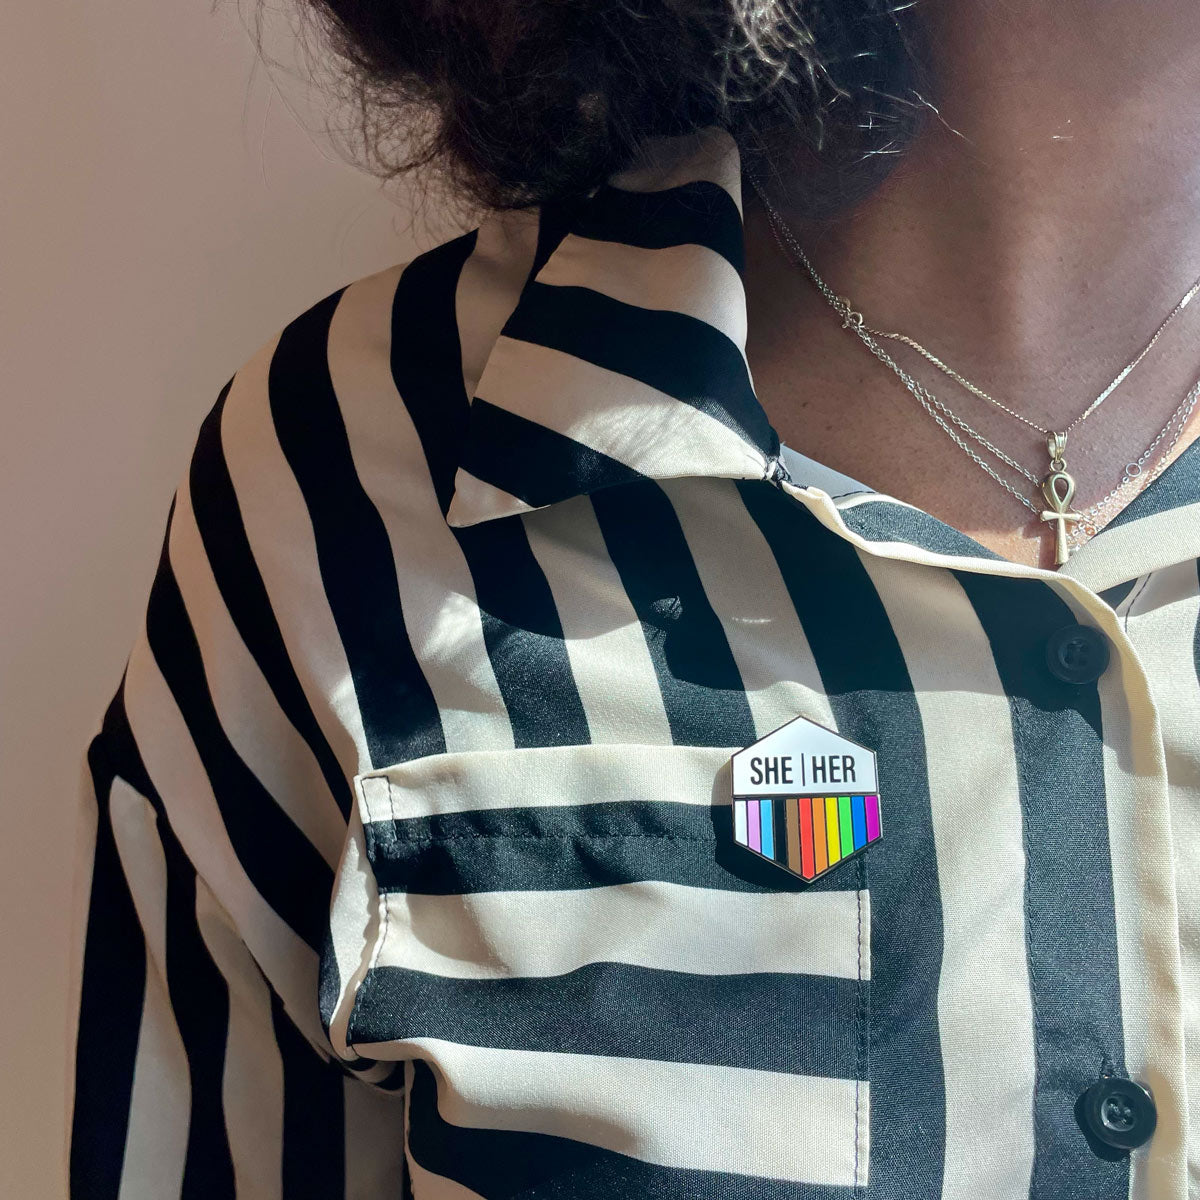 Woman wearing a Flags For Good Pronoun + Pride Flag Magenetic Pin with She Her pronouns and a rainbow flag